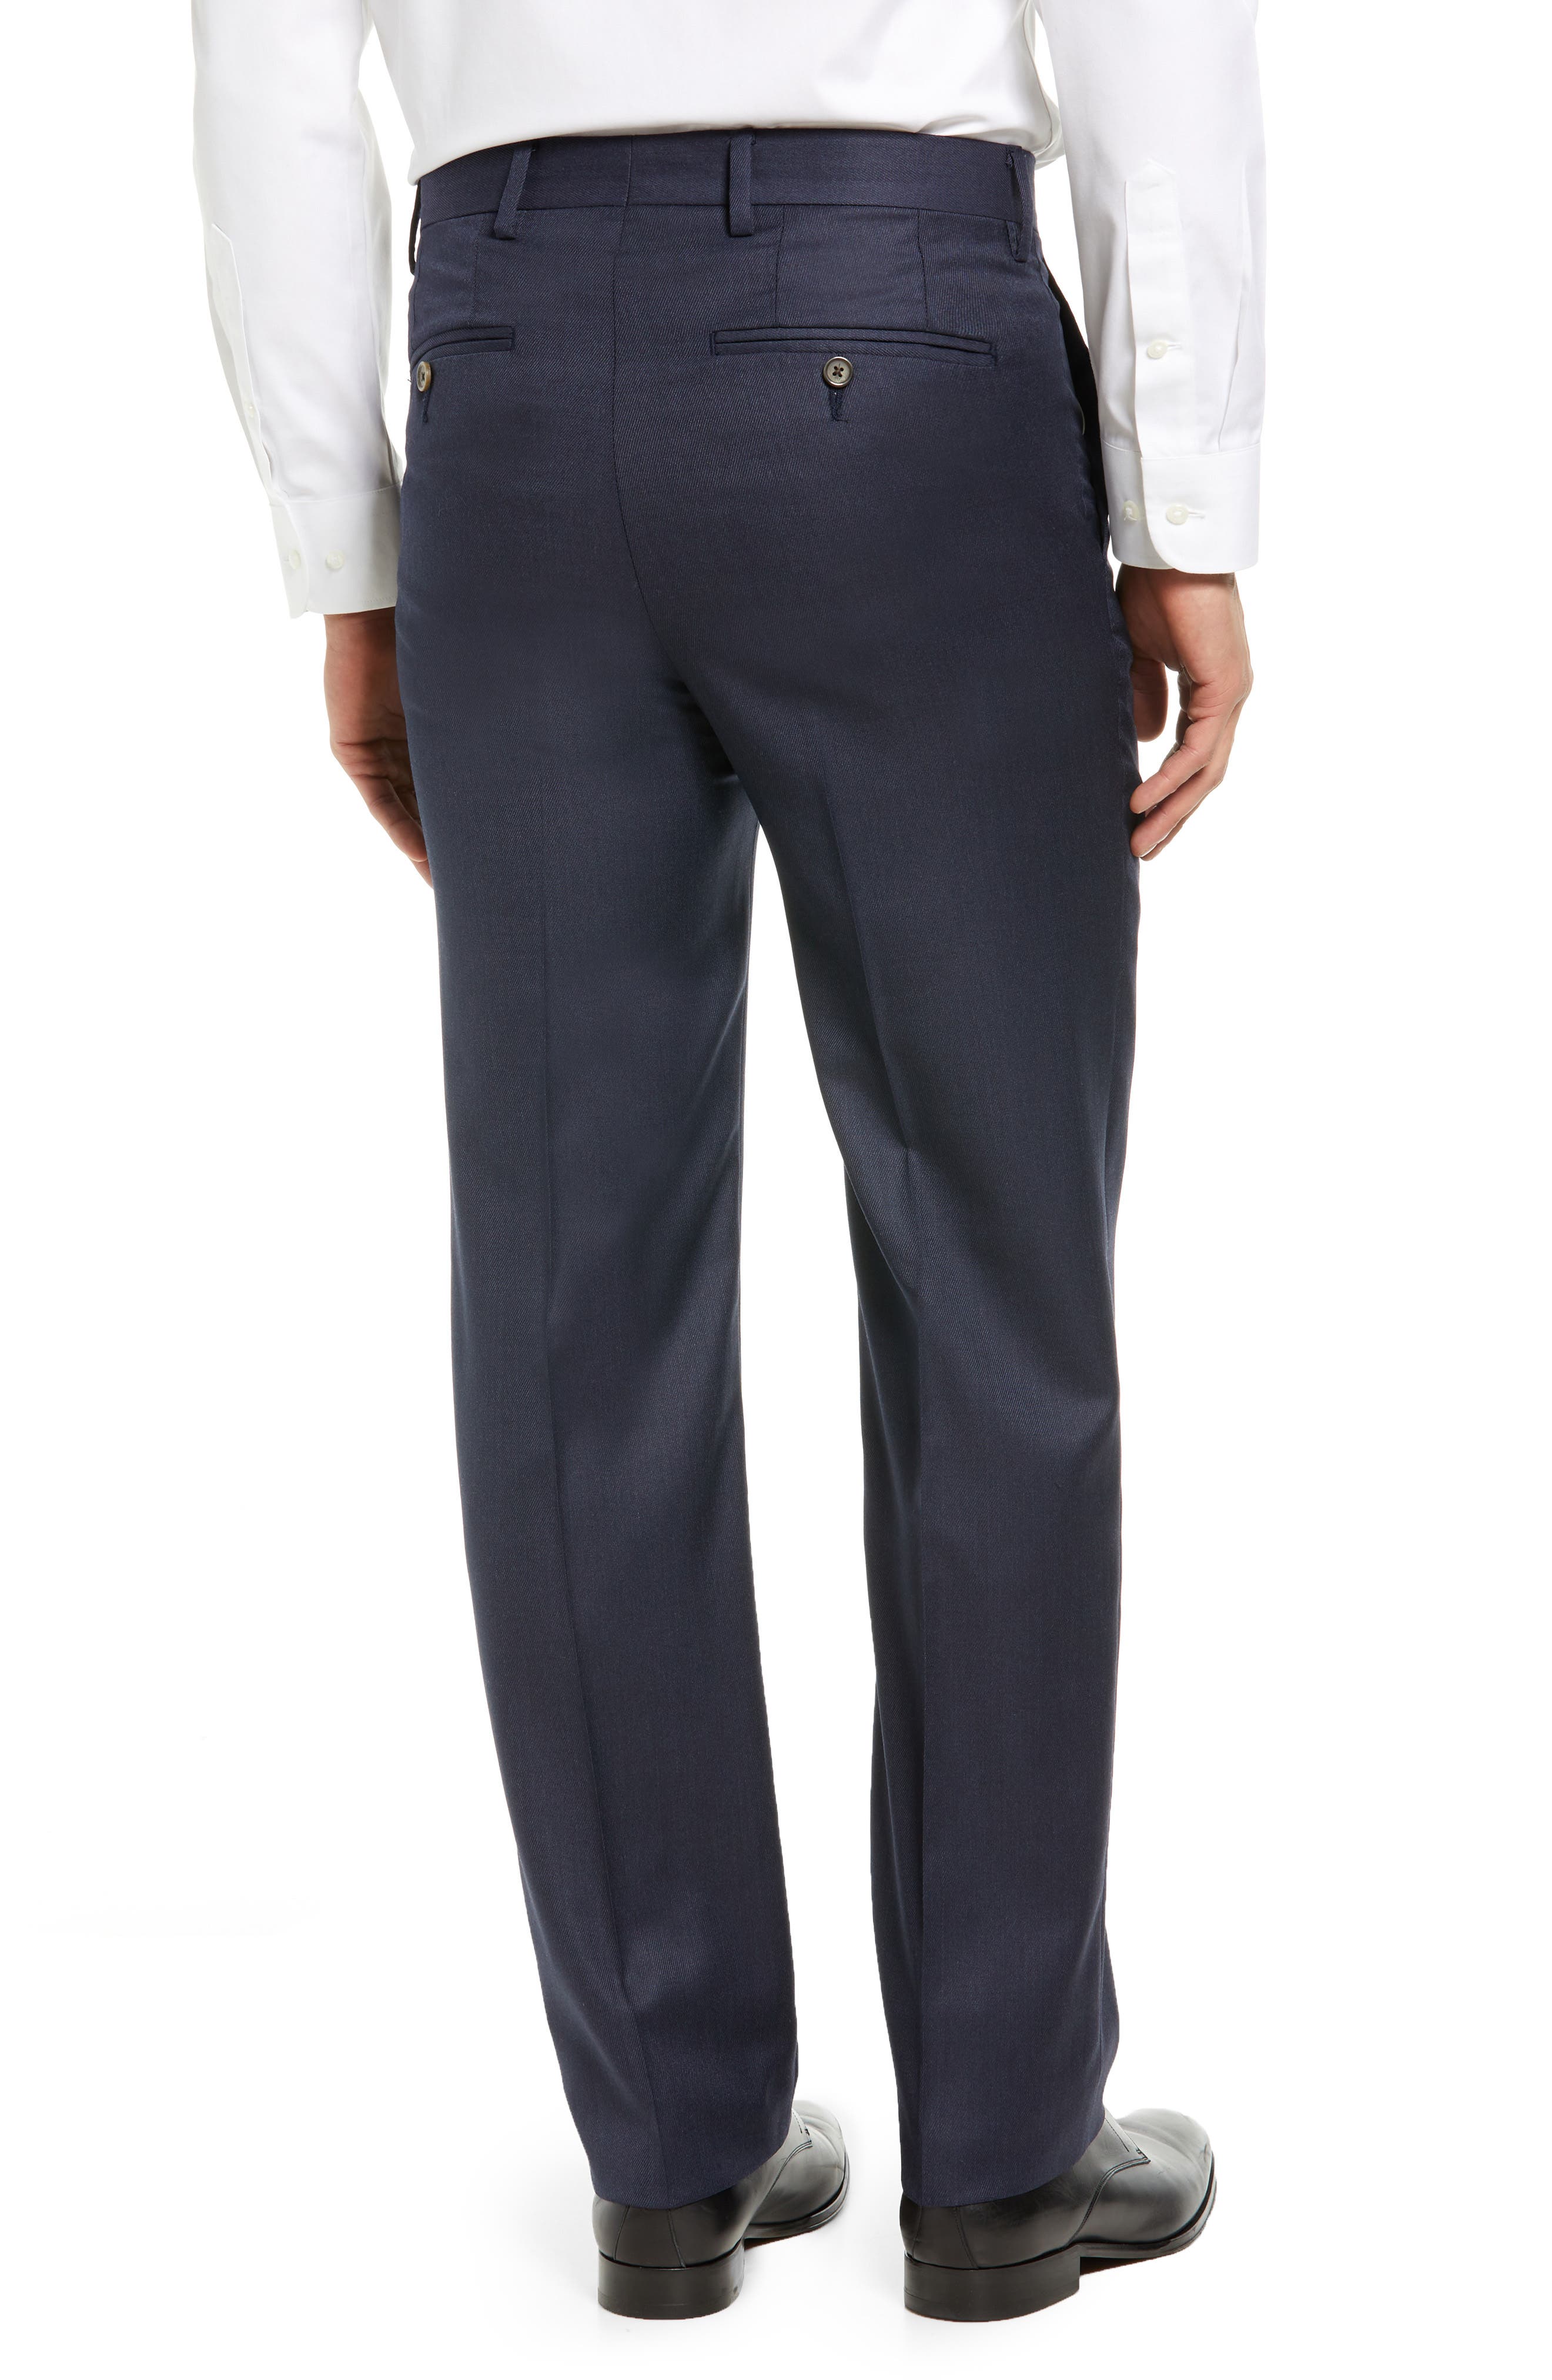 Berle Twill Stretch Flat Front Worsted Wool Dress Pants | Nordstrom